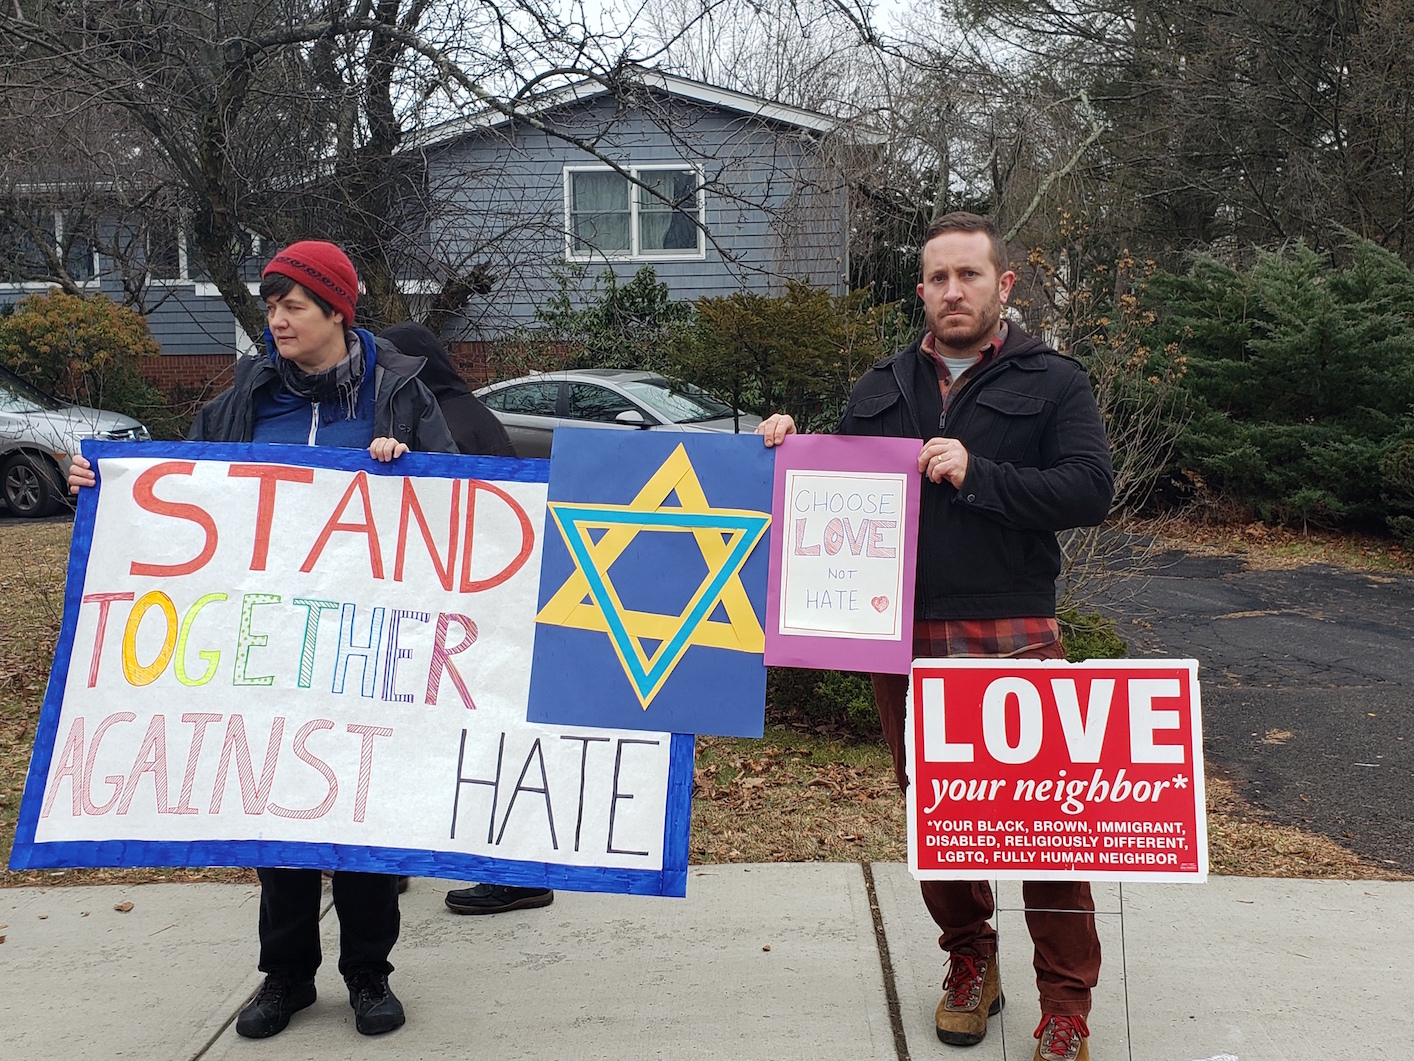 PEOPLE PREACHING SUPPORT AGAINST HATE